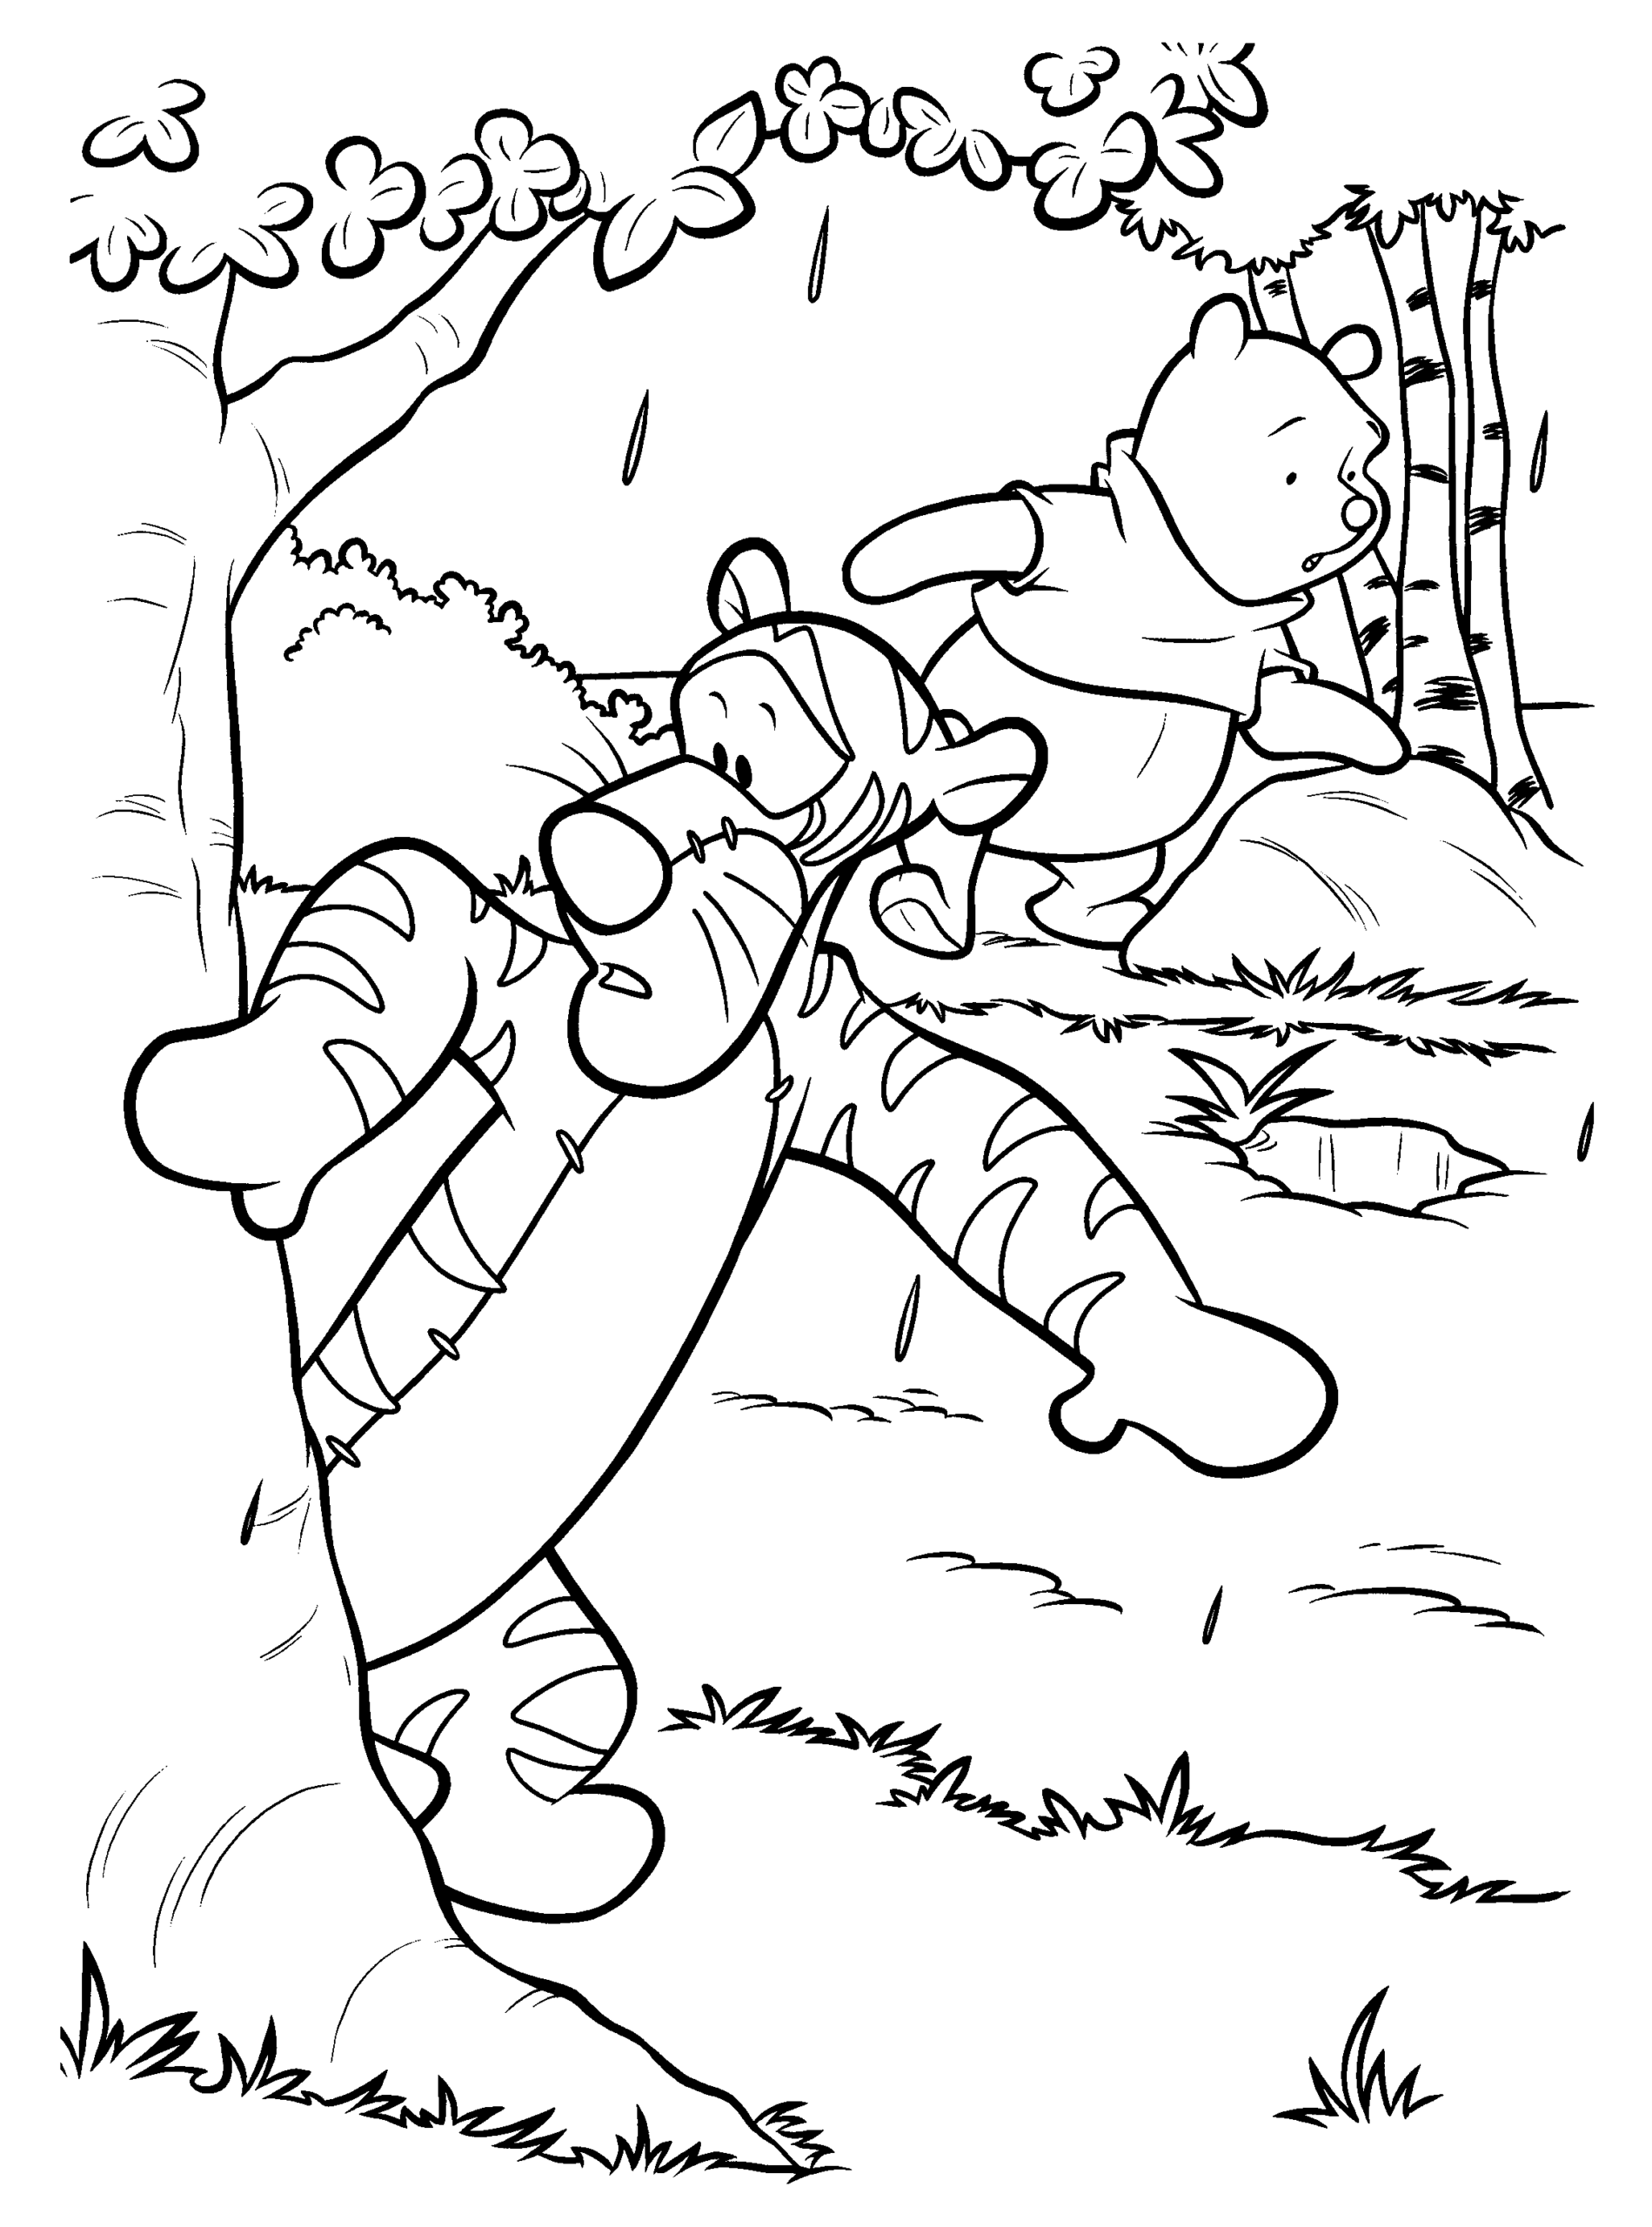 Winnie the Pooh Coloring Pages Cartoons winnie the pooh 10 Printable 2020 7077 Coloring4free